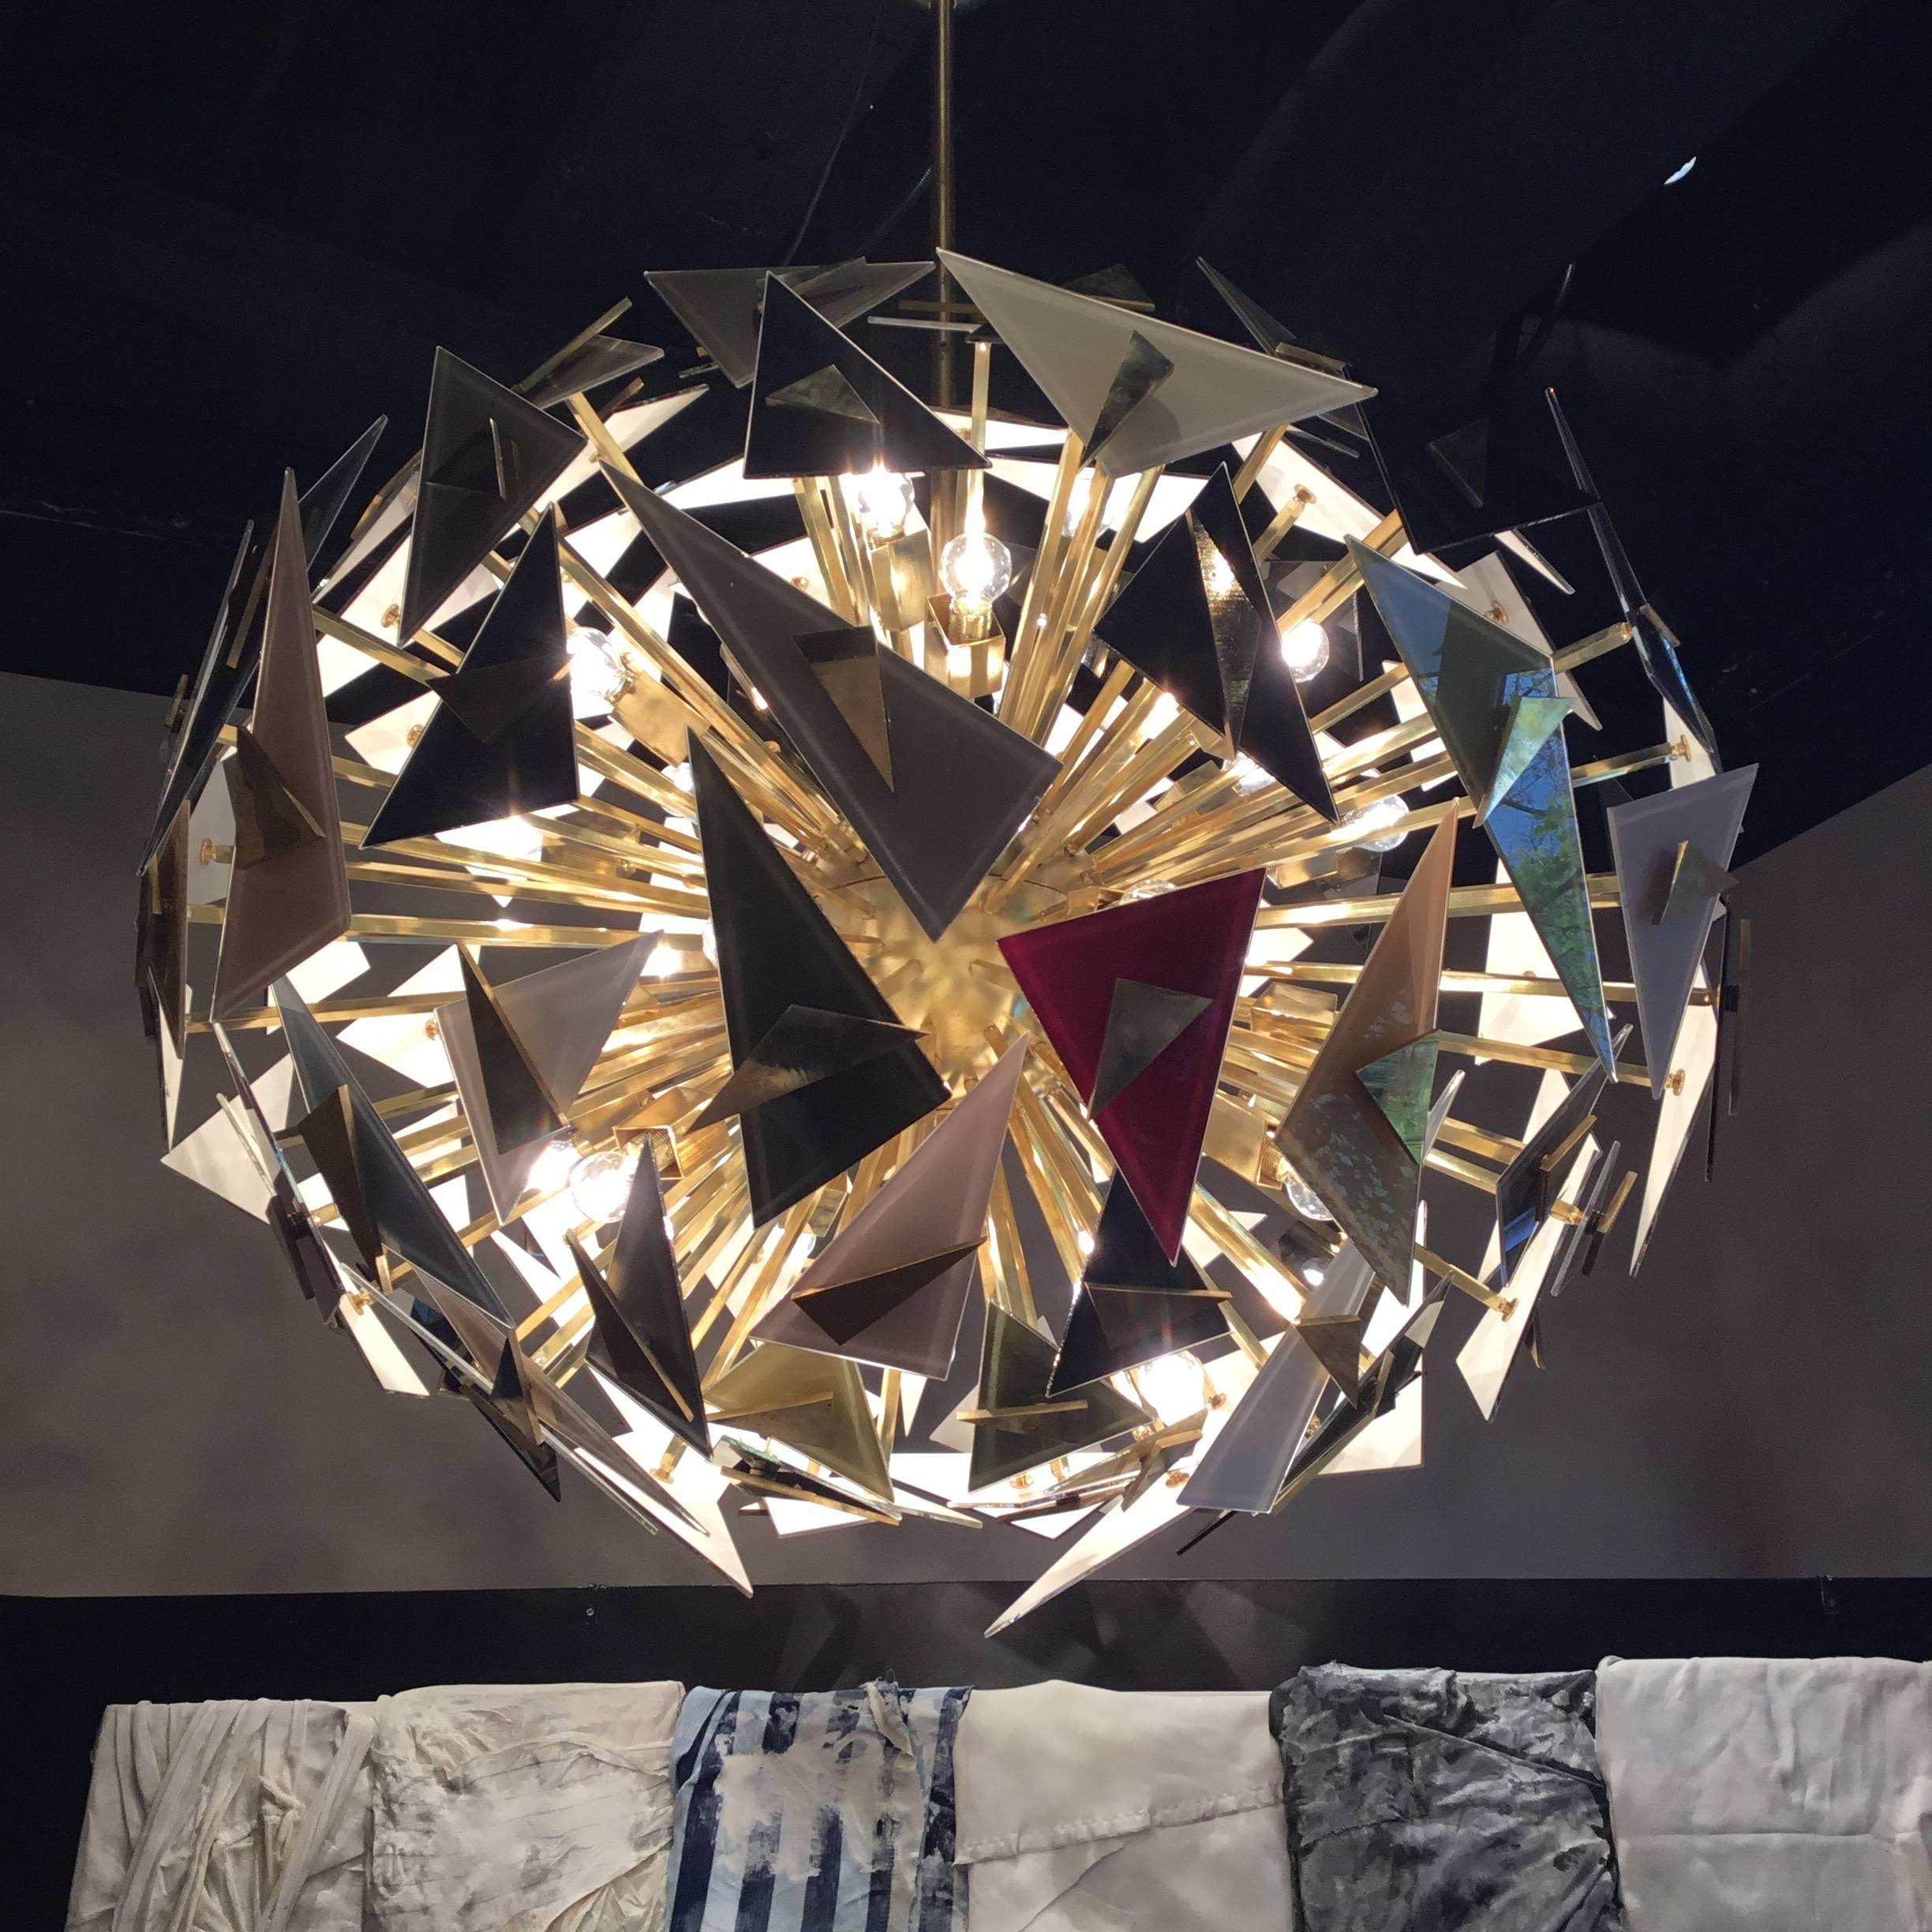 Vintage Italian chandelier, handcraft by a Venetian craftman with the famous venetian glass.
composed of a brass structure with numerous triangles of different shapes and colors at the end
Made in Italy, 1990 circa